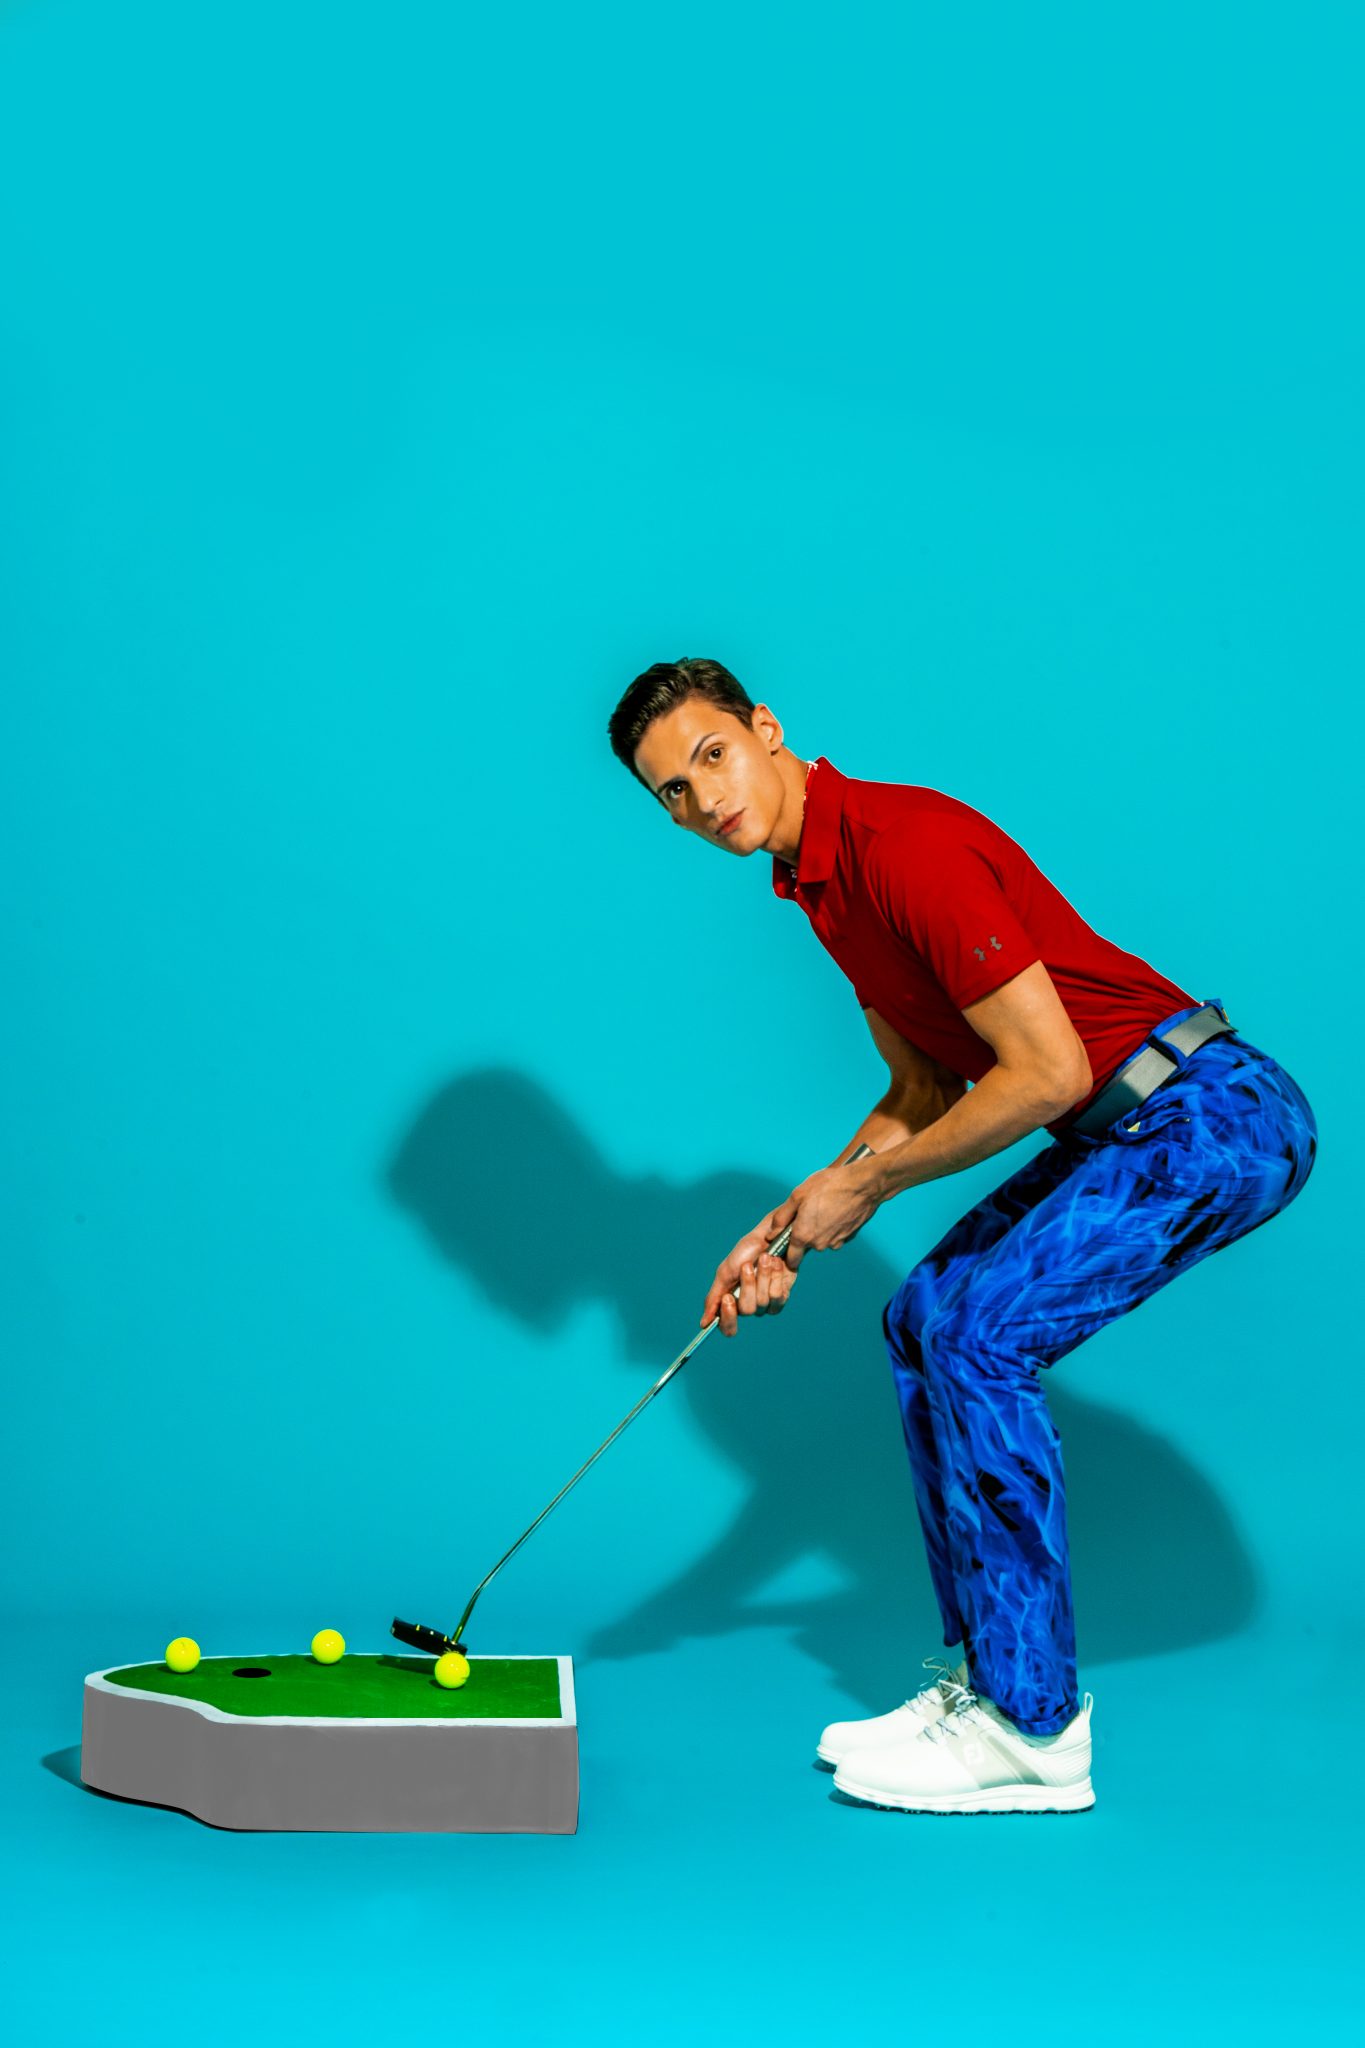 Under Armour polo shirt and belt; Loudmouth printed shirt and pants, Footjoy SuperLites XP shoes, Titleist golf balls, and Hybrid club all from Empire Golf & Sports